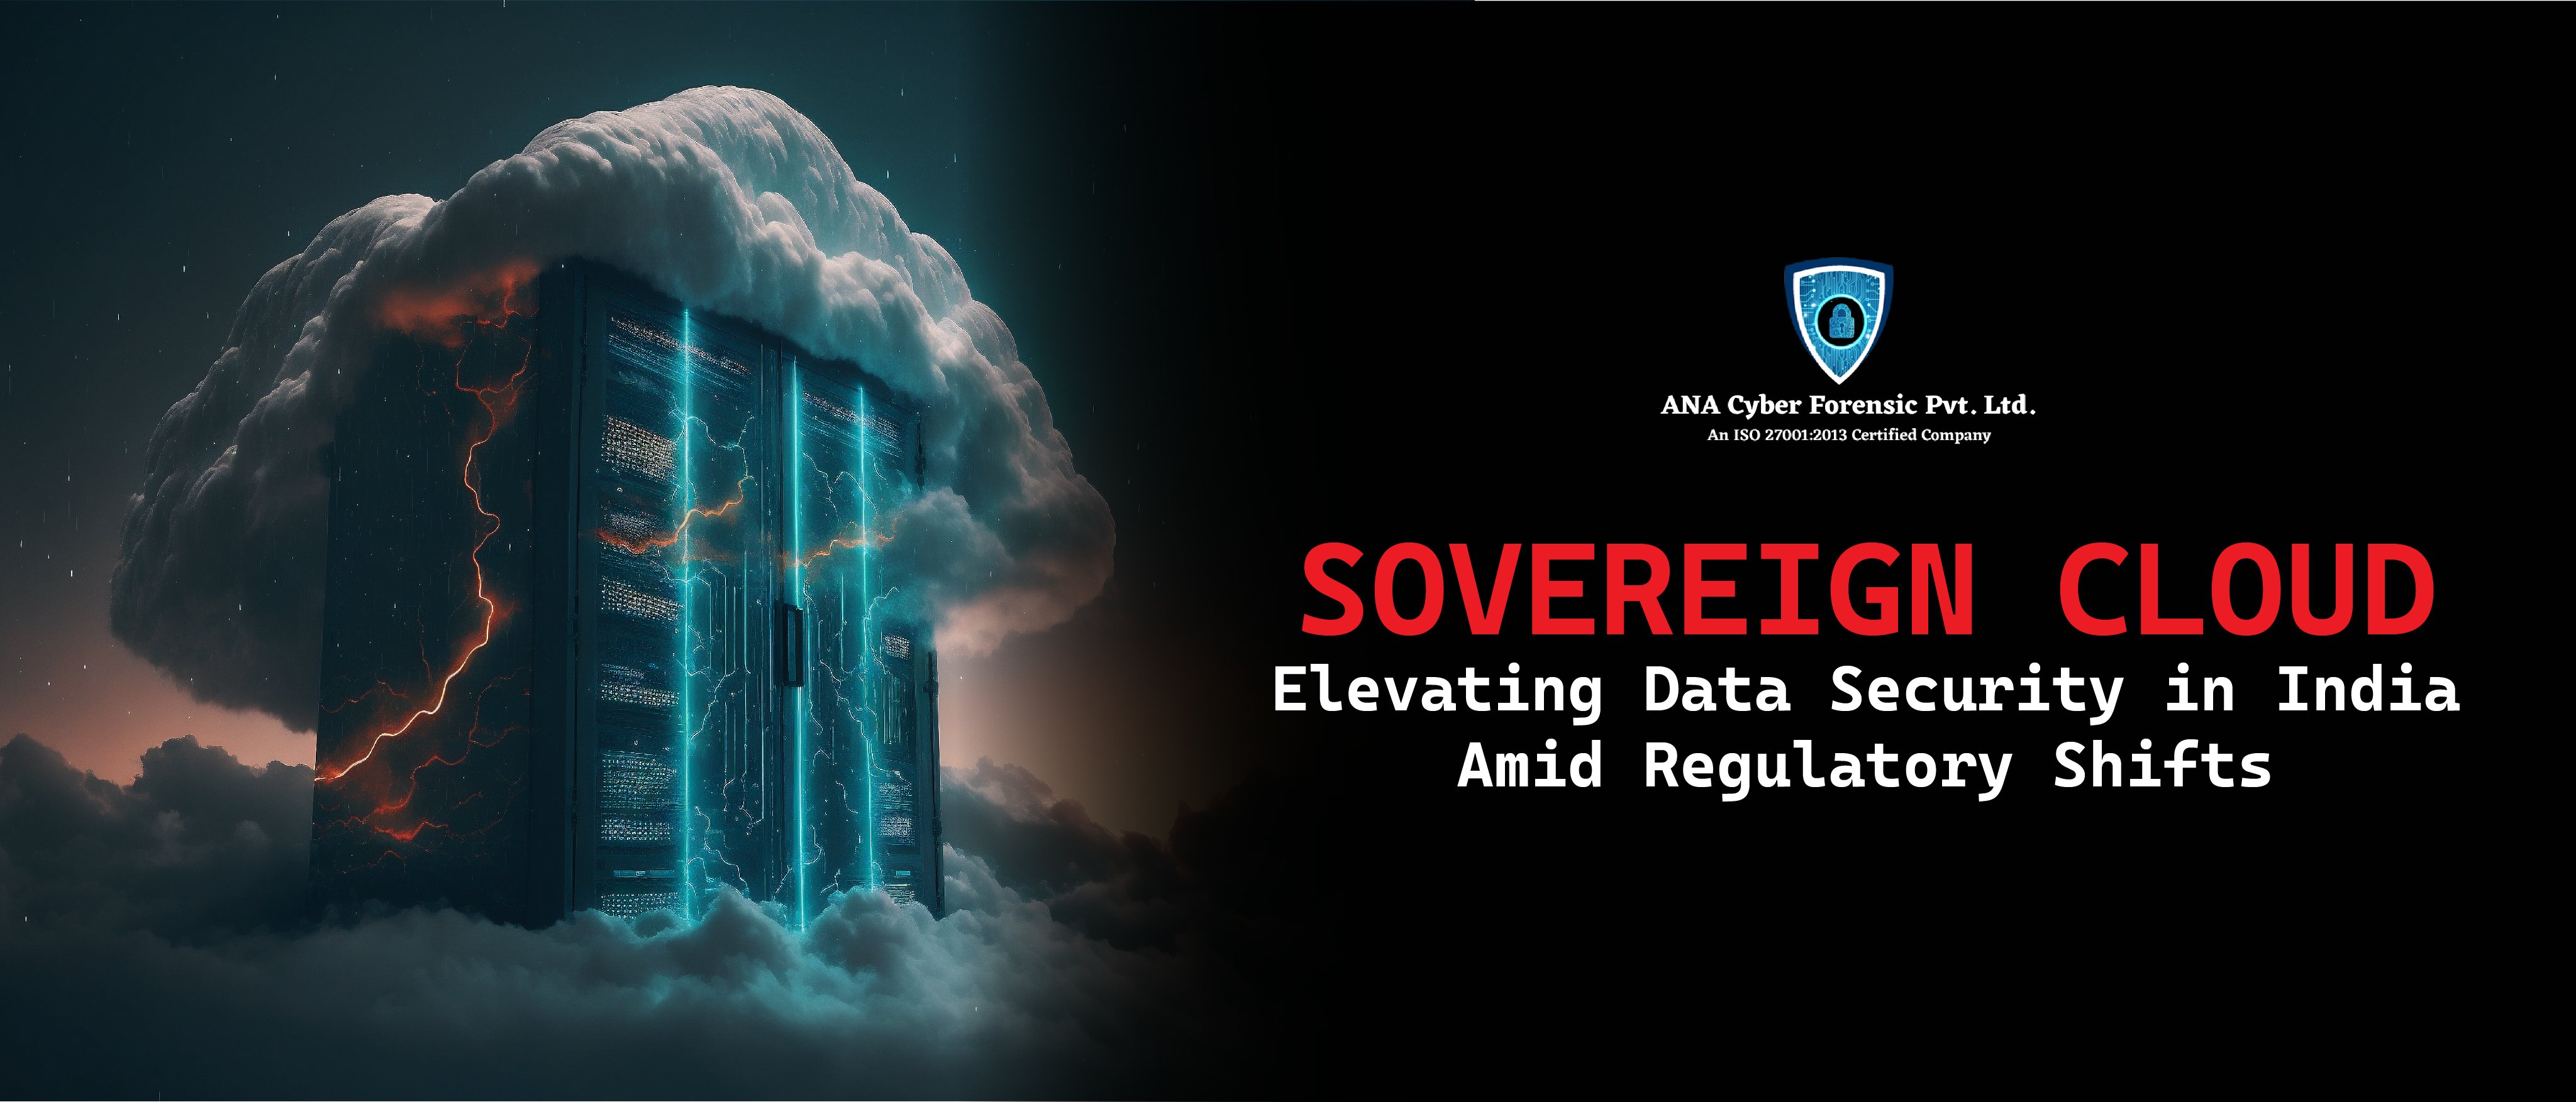 Sovereign Cloud: Elevating Data Security in India Amid Regulatory Shifts